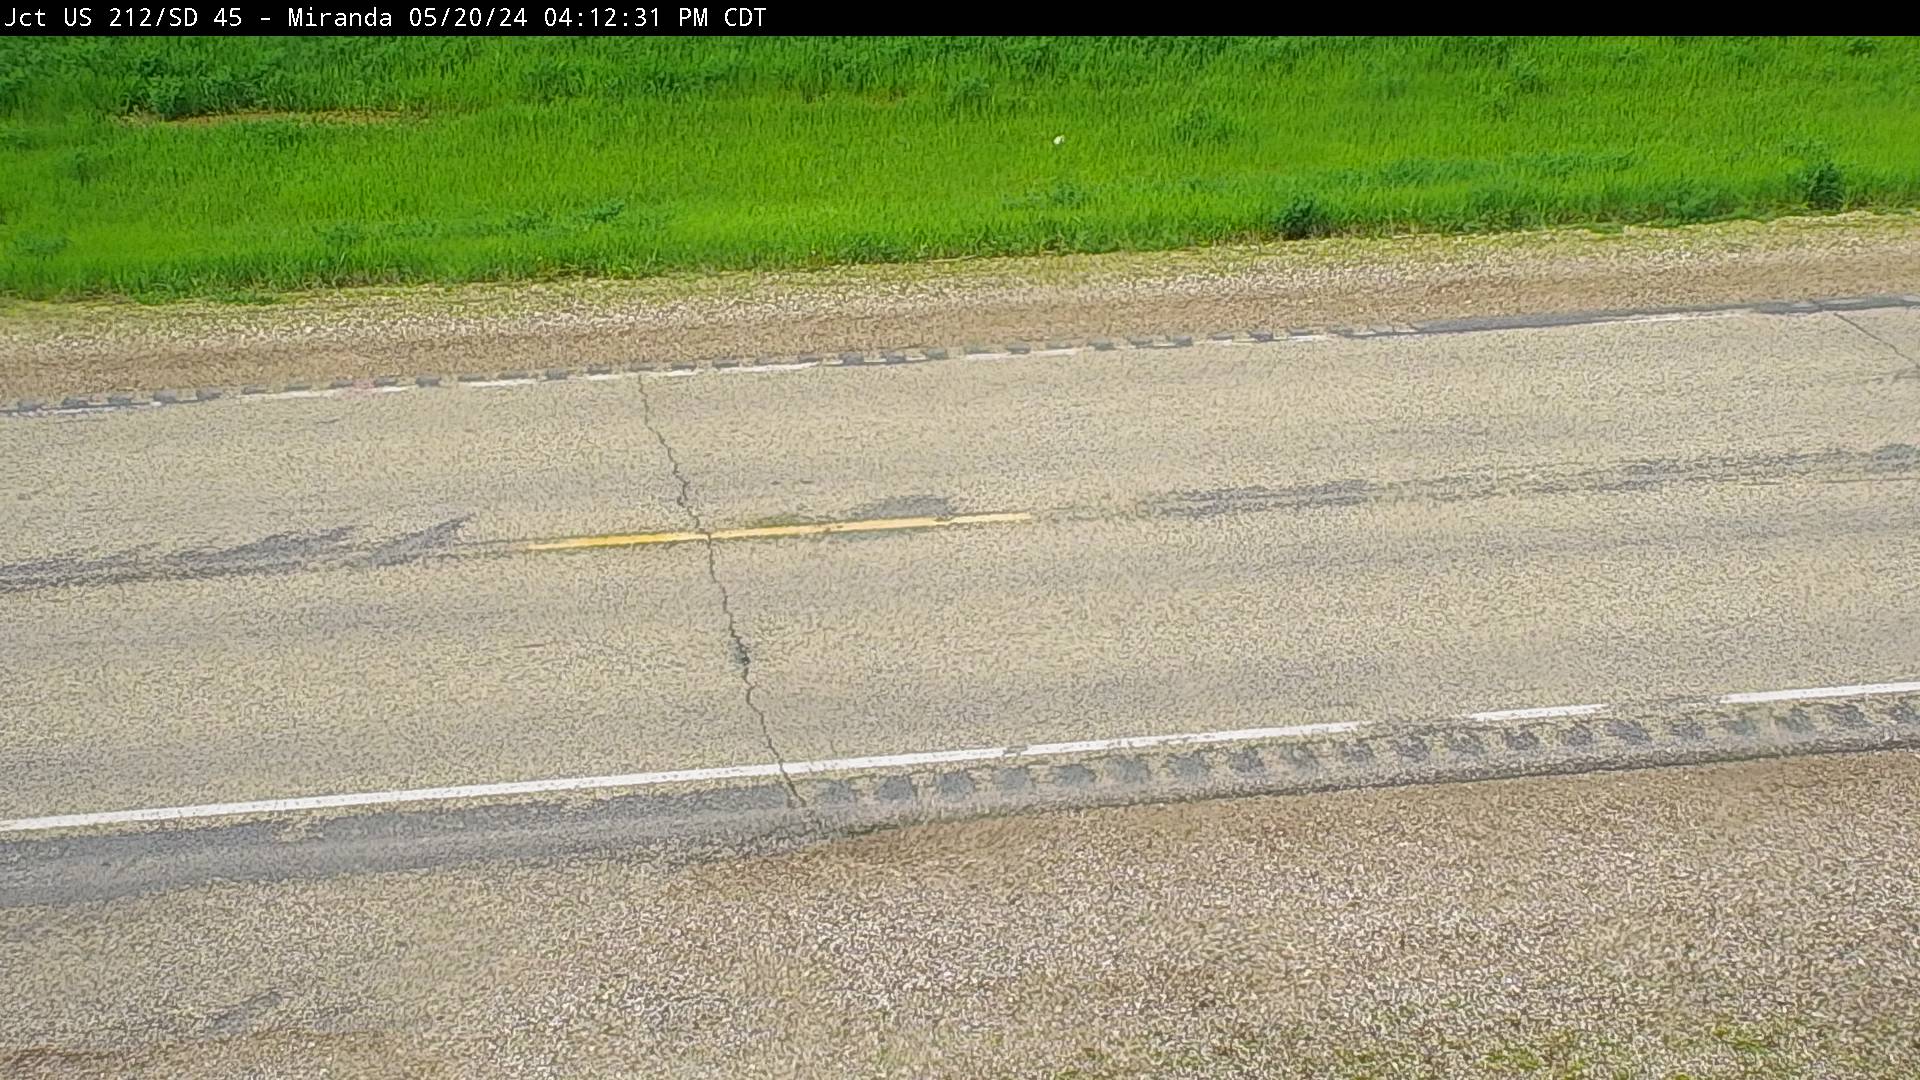 Traffic Cam 5 miles south of town at junction US-212 & SD-45 - North Player